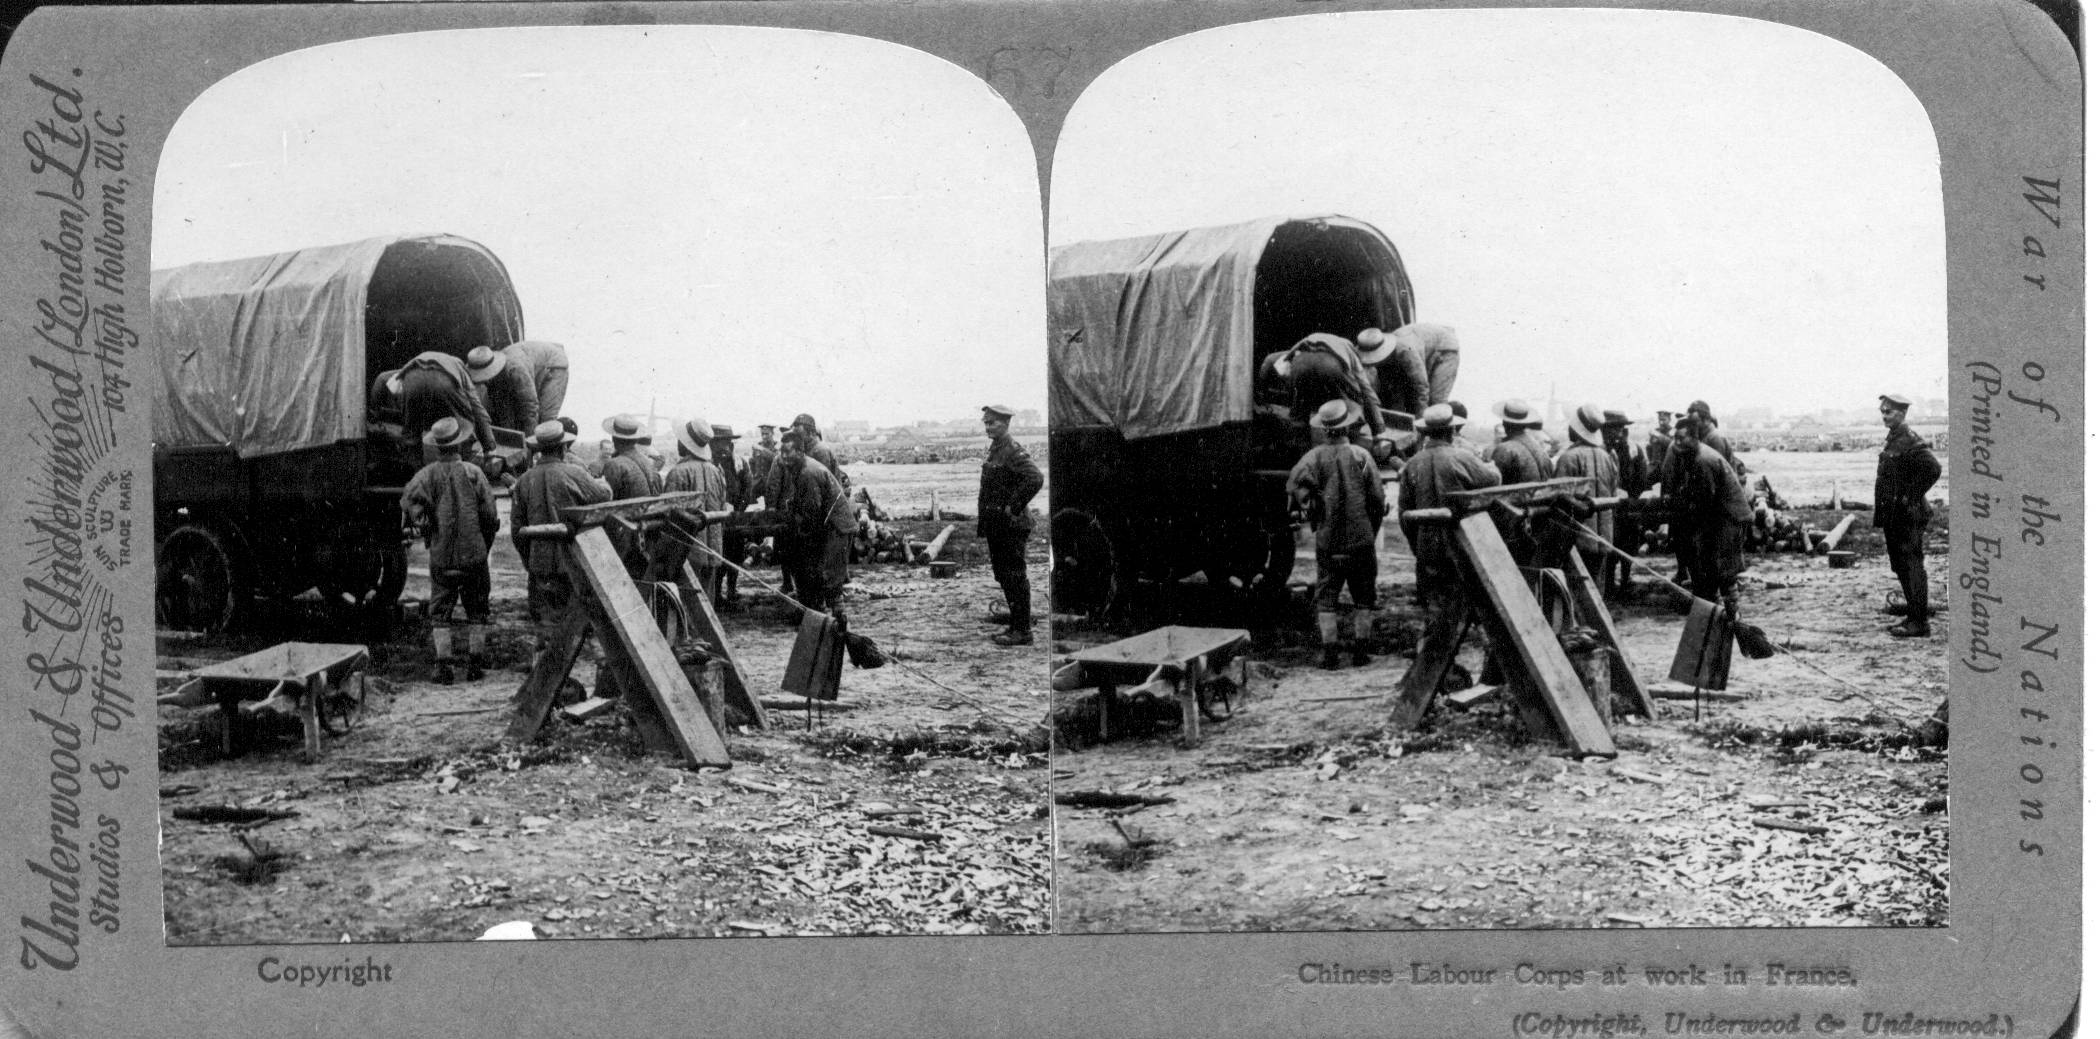 Chinese labour Corps at work in France